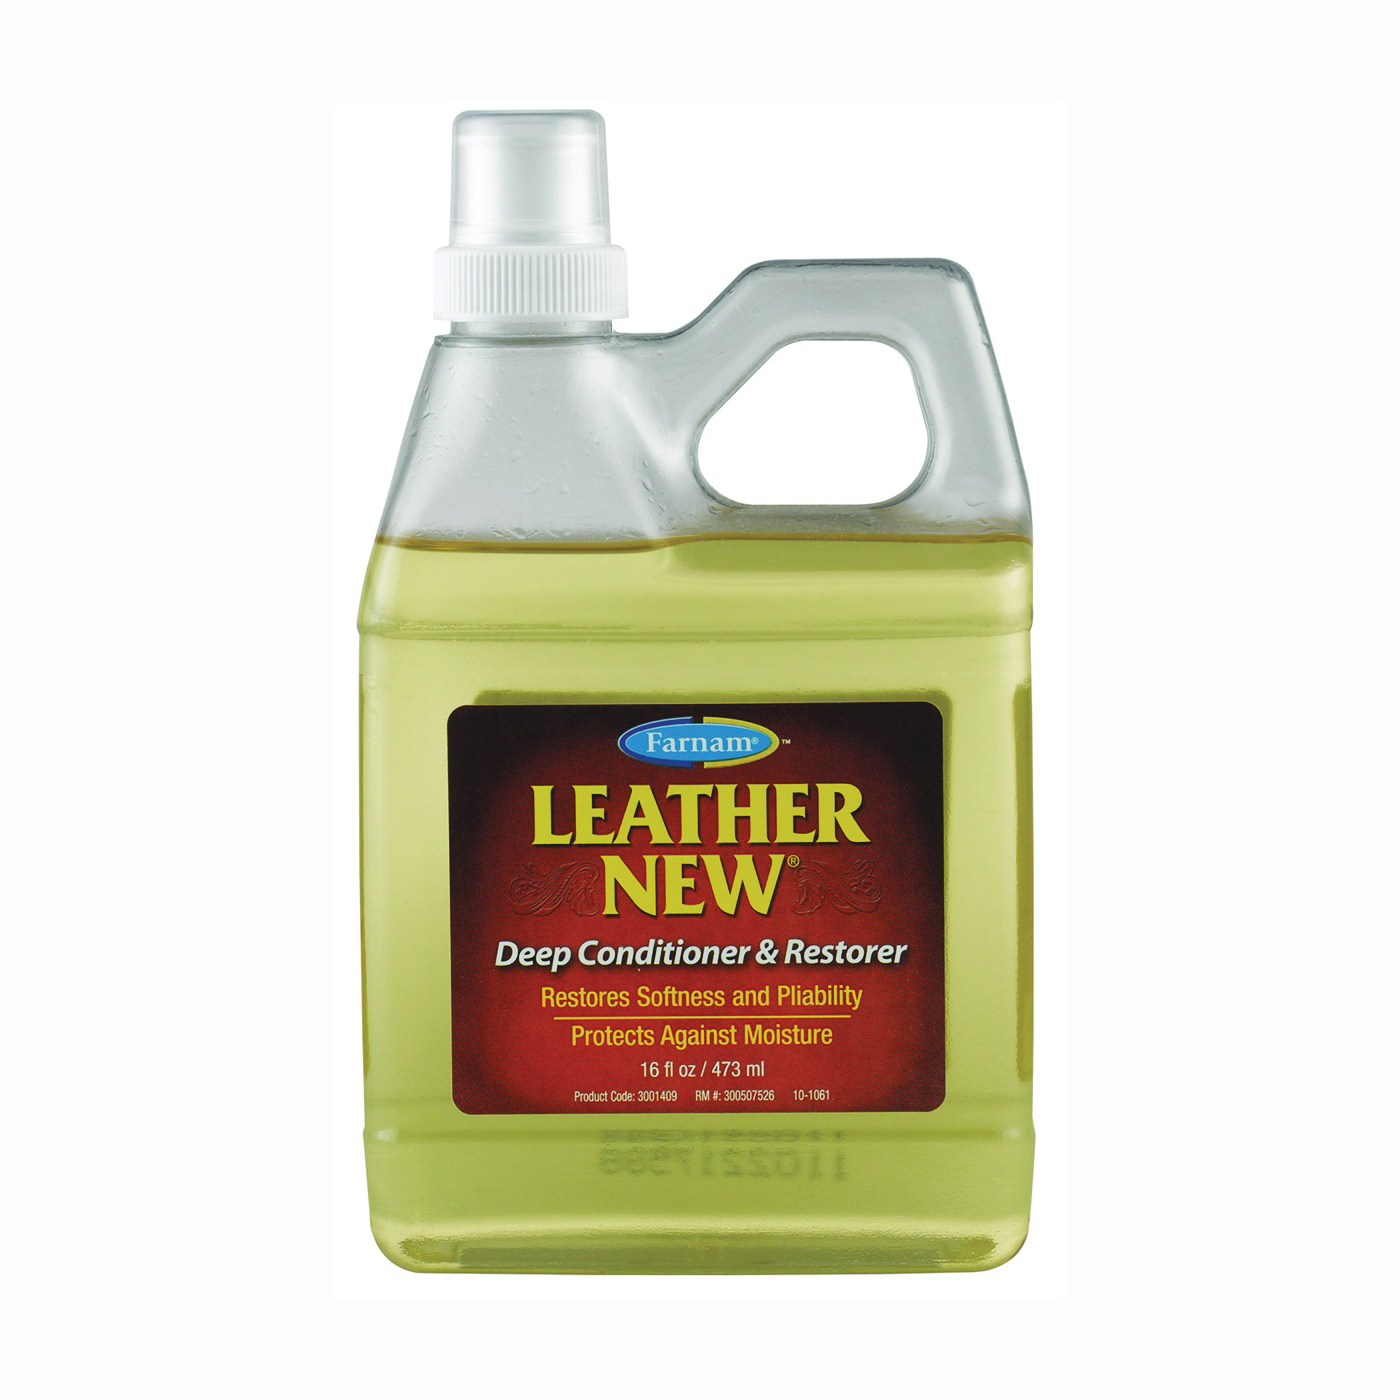 Farnam Leather New 3001409 Deep Conditioner and Restorer, Liquid, Clear Yellow, 16 oz